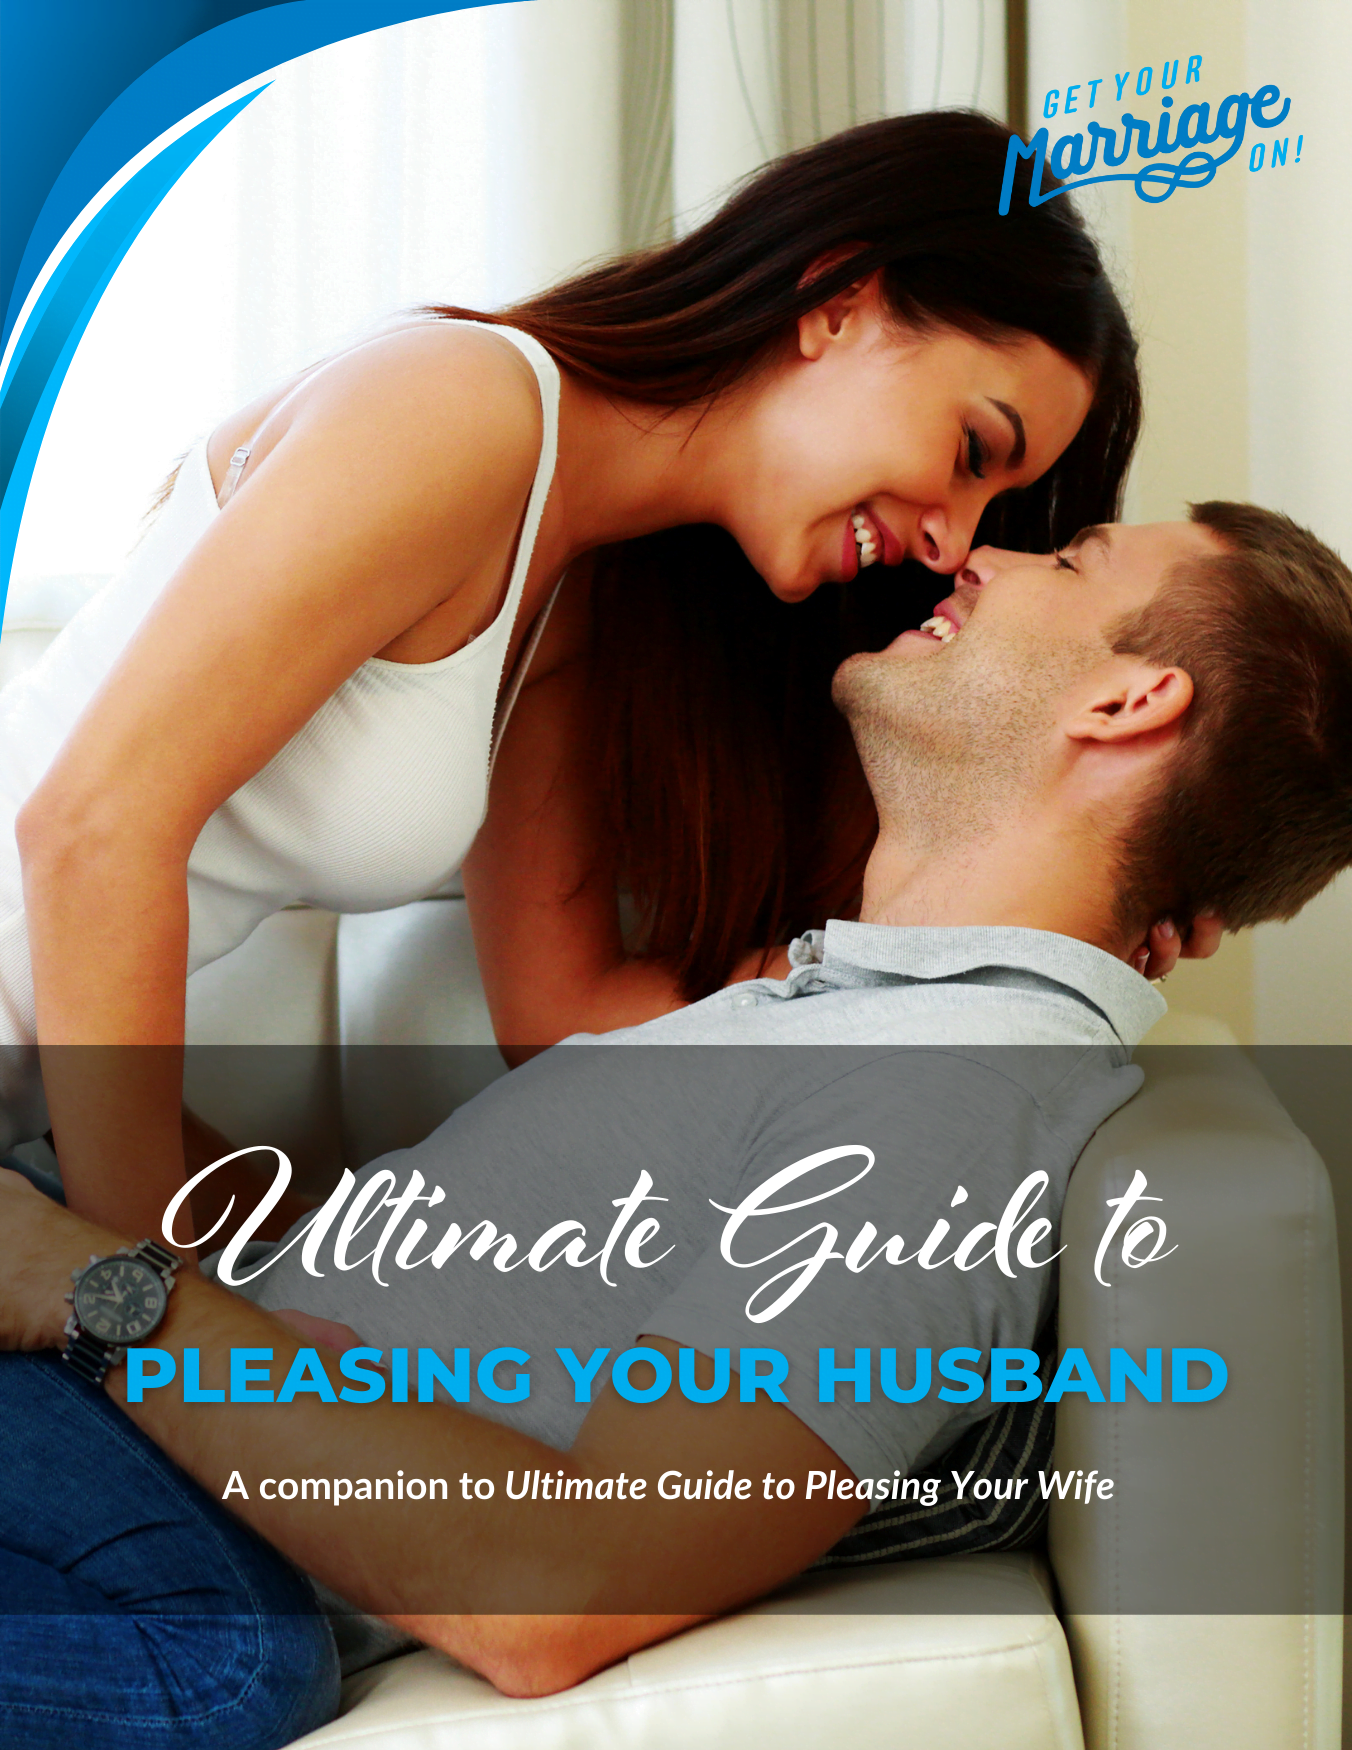 Ultimate Guide to Pleasing Your Husband photo